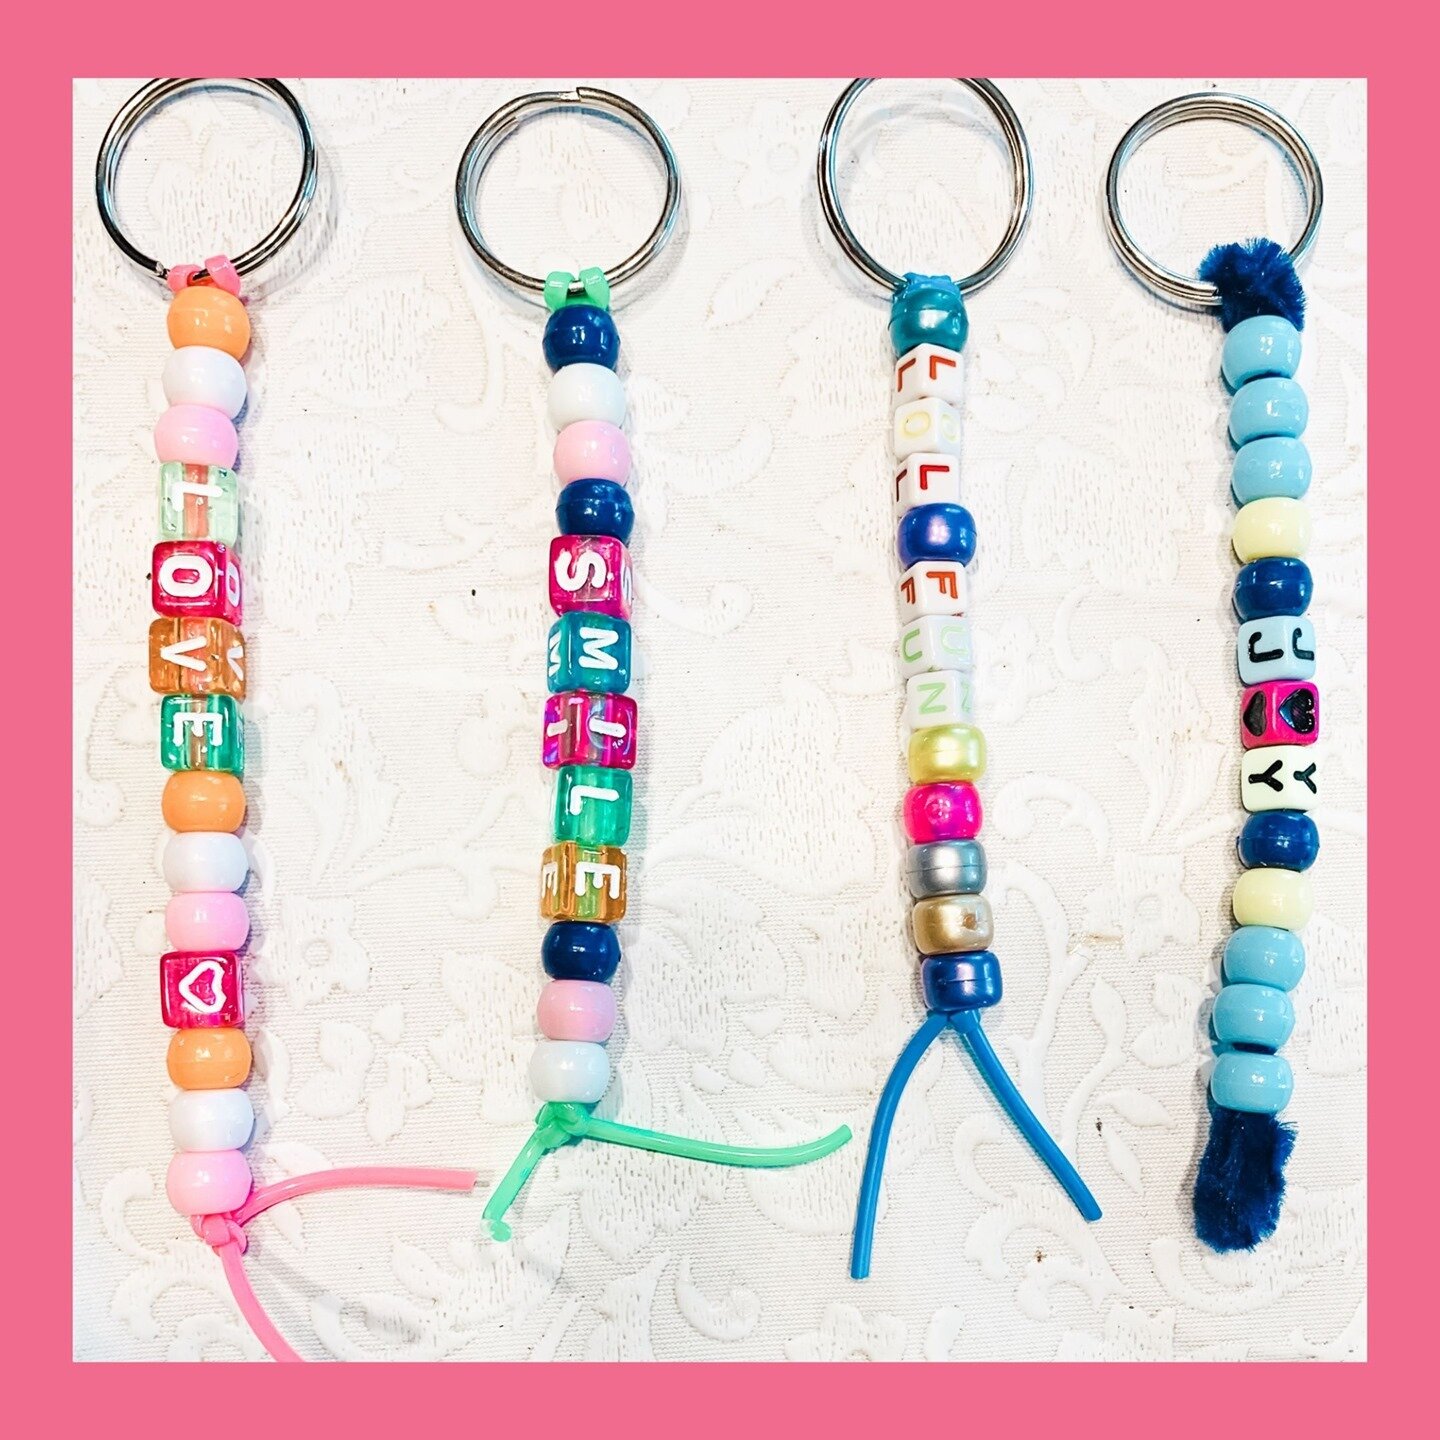 Looking for a fun and meaningful crafting project for your kids? Check out these adorable kindness beaded keychains are students will be making today in our Kids Crafting for Good Club!⁣
.⁣
Join other children from all over as they craft items to spr